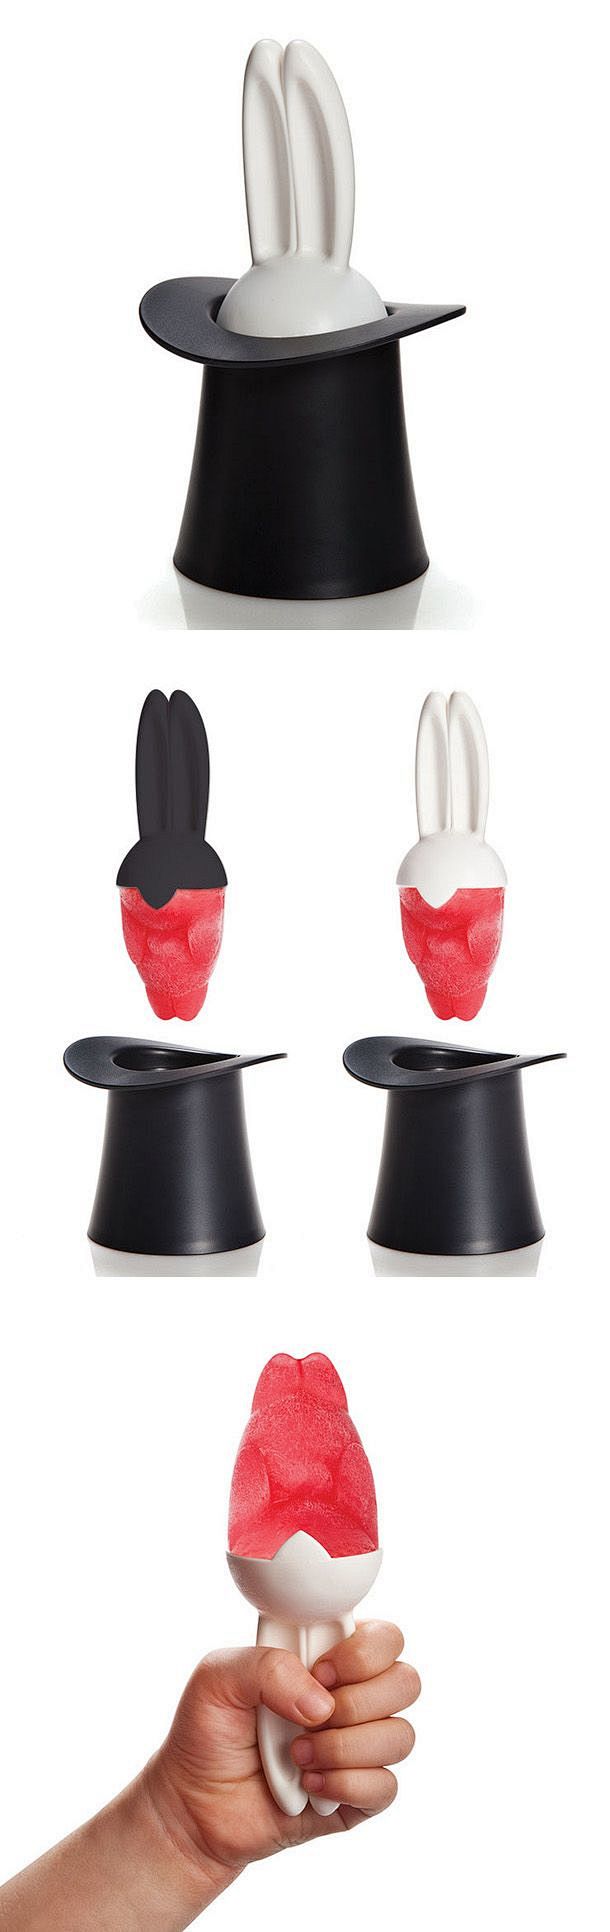 Bunny Popsicle Mold